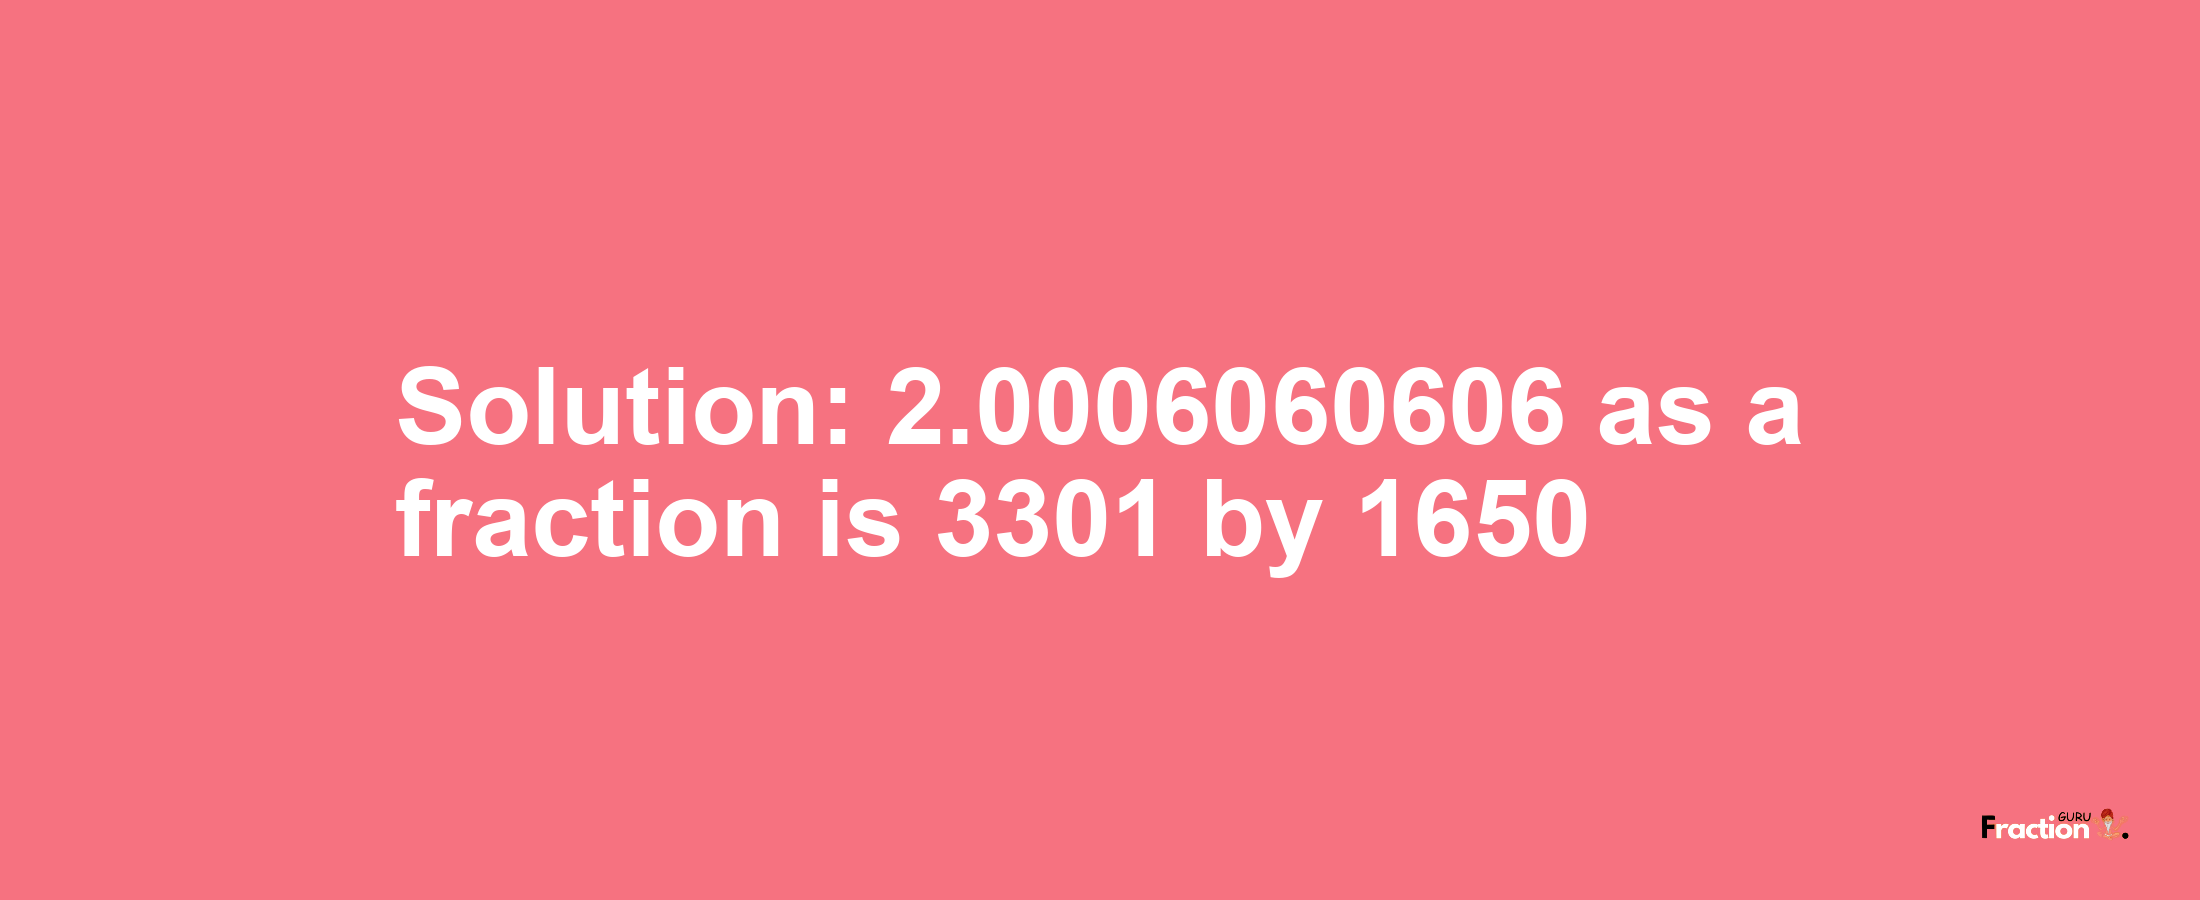 Solution:2.0006060606 as a fraction is 3301/1650